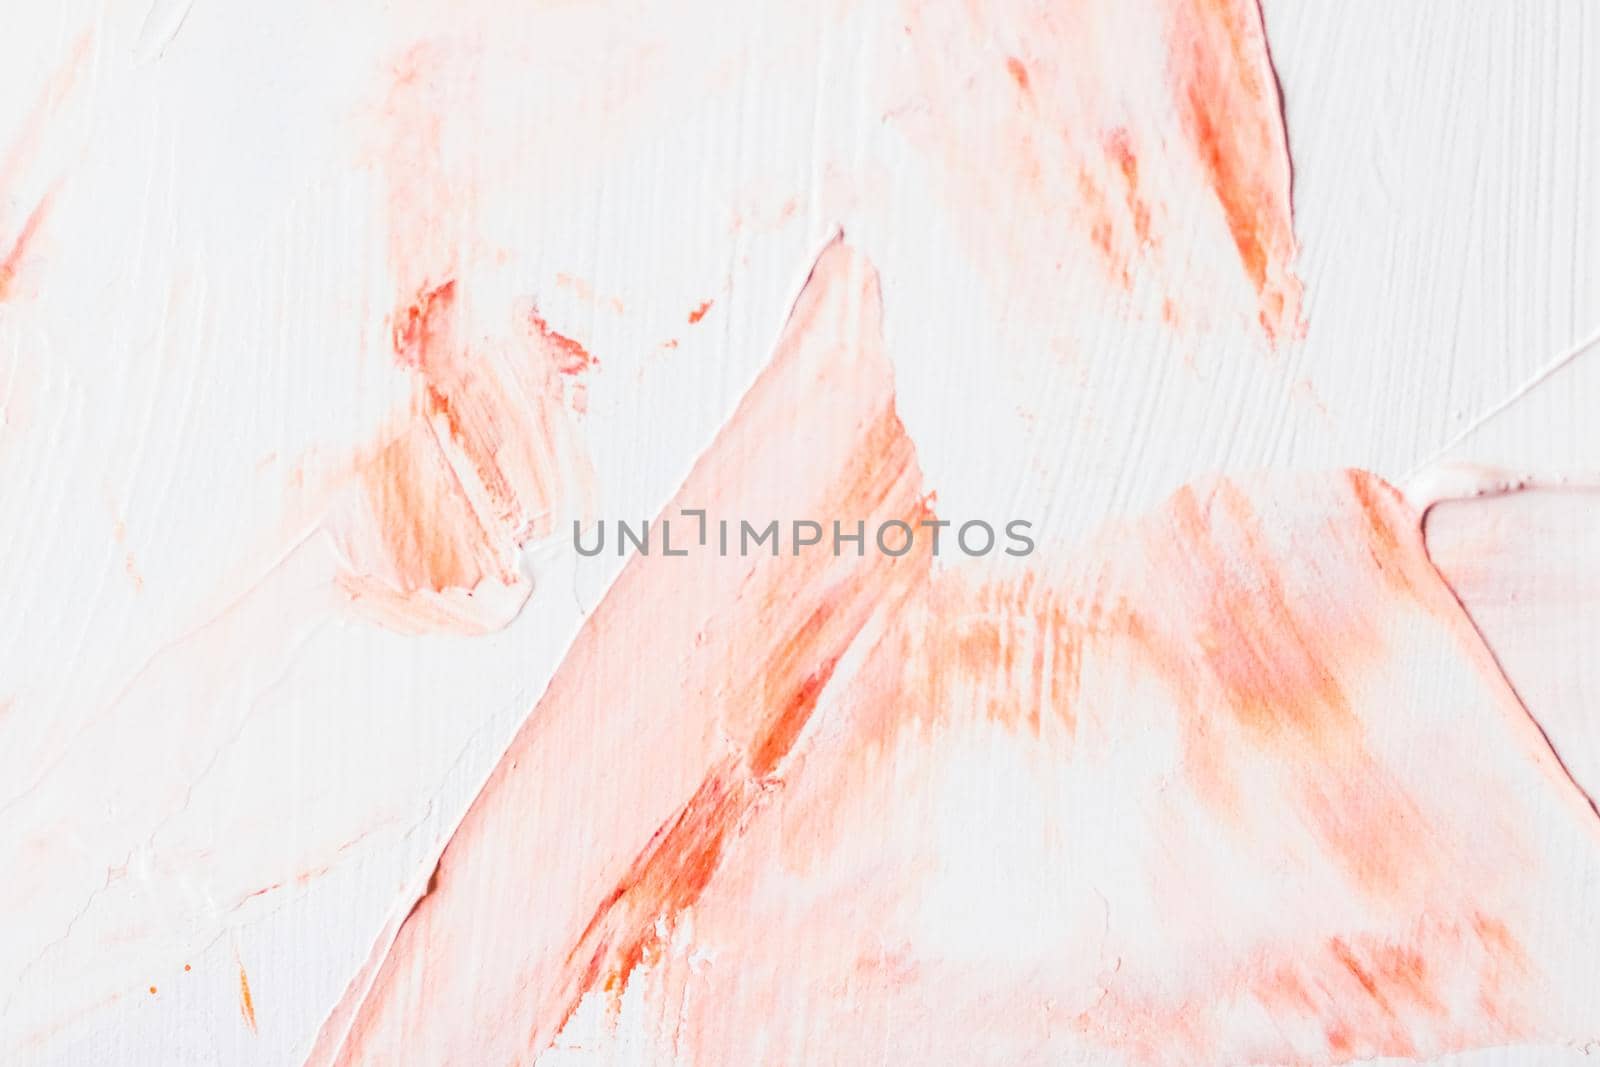 Art, branding and vintage concept - Artistic abstract texture background, orange acrylic paint brush stroke, textured ink oil splash as print backdrop for luxury holiday brand, flatlay banner design